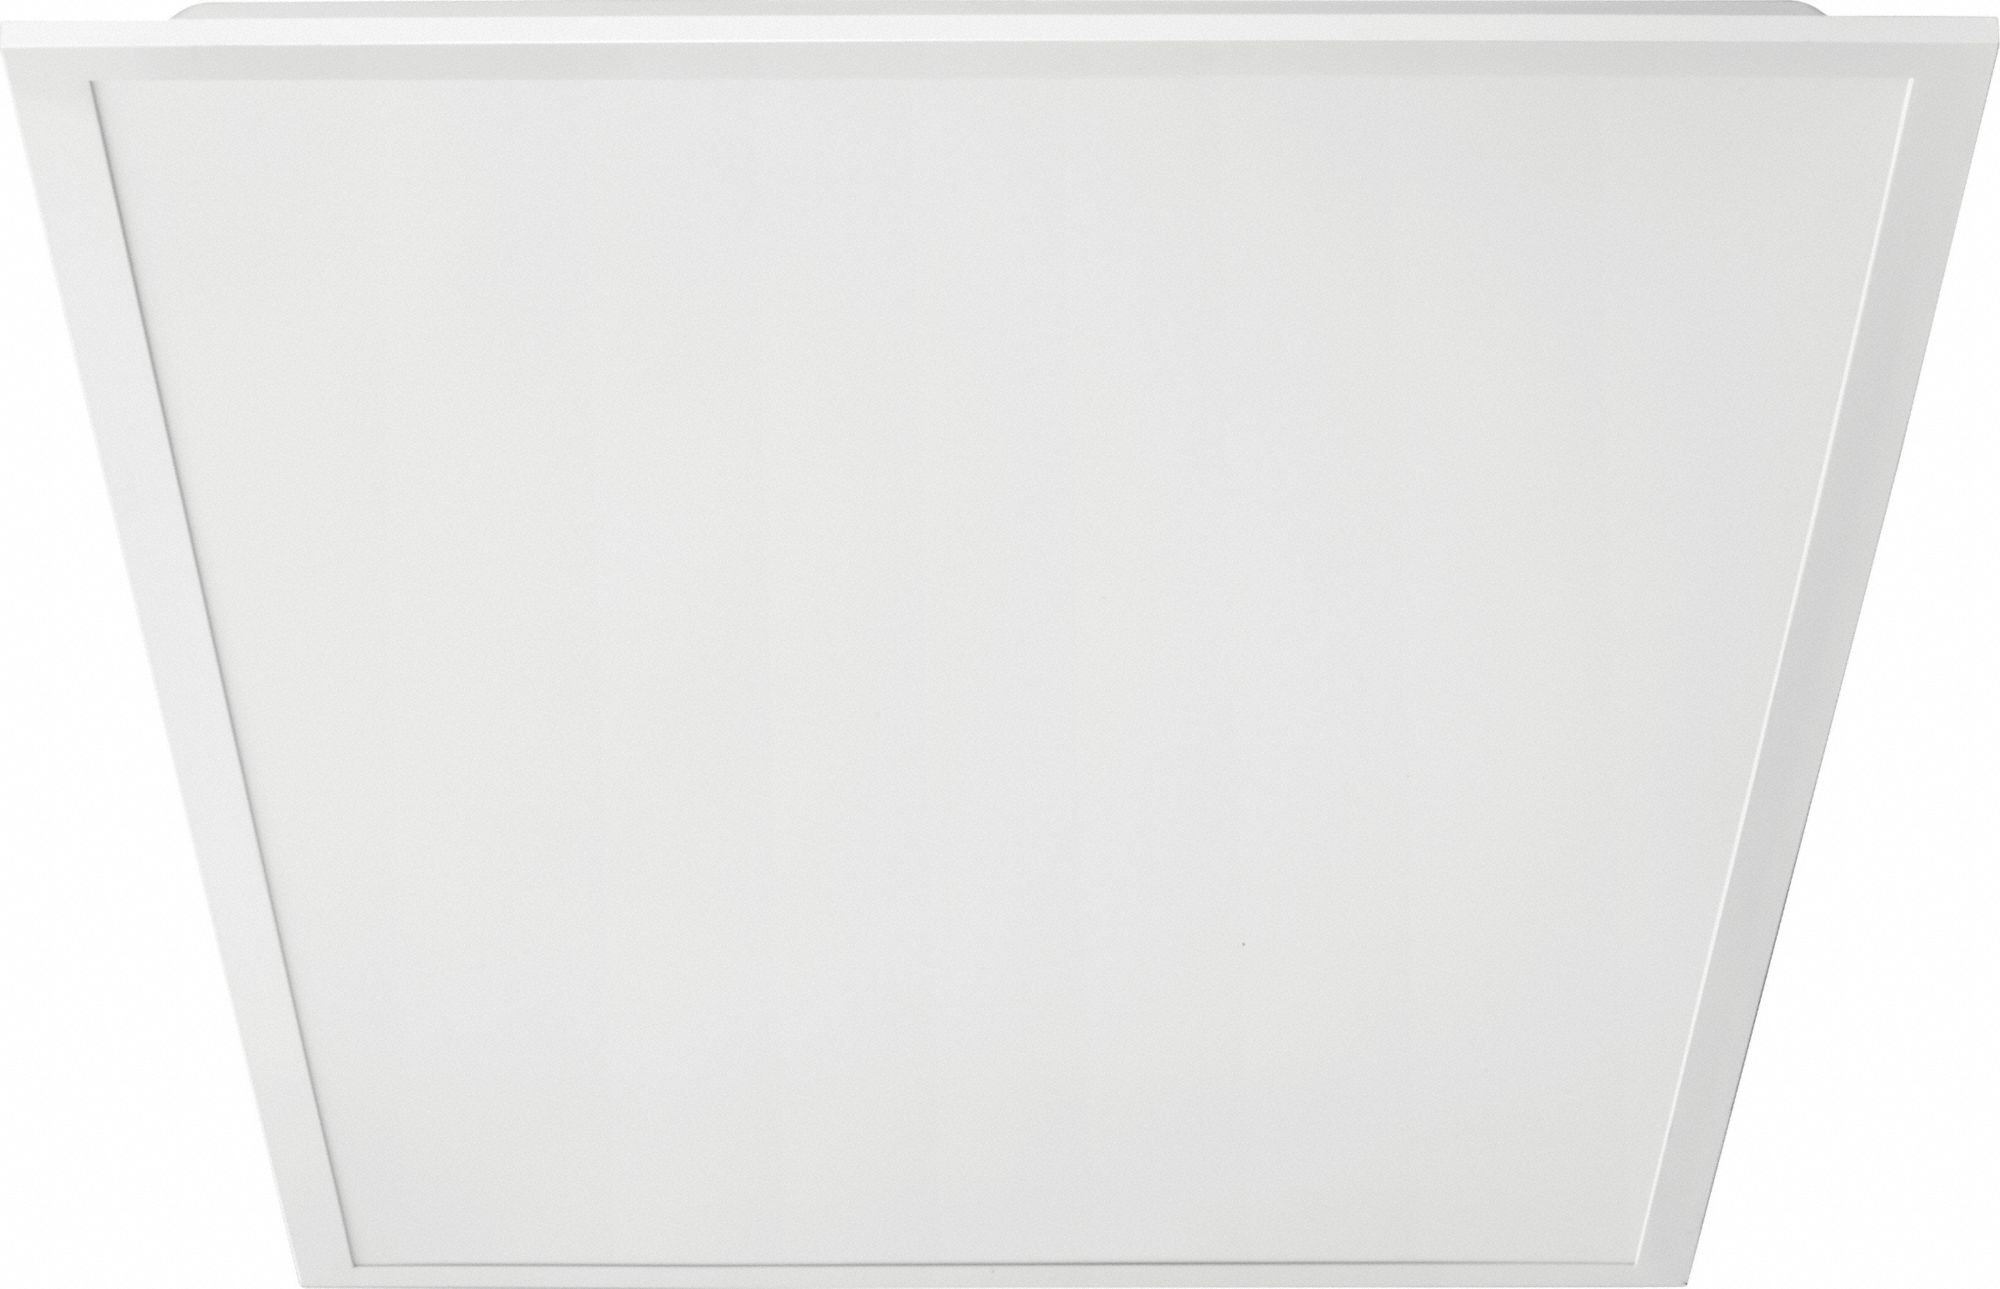 Lithonia Lighting CPX 2X4 4000LM 40K A12 M2 White Contractor Select 24 x  48 4000K Flat Panel LED Ceiling Fixture 